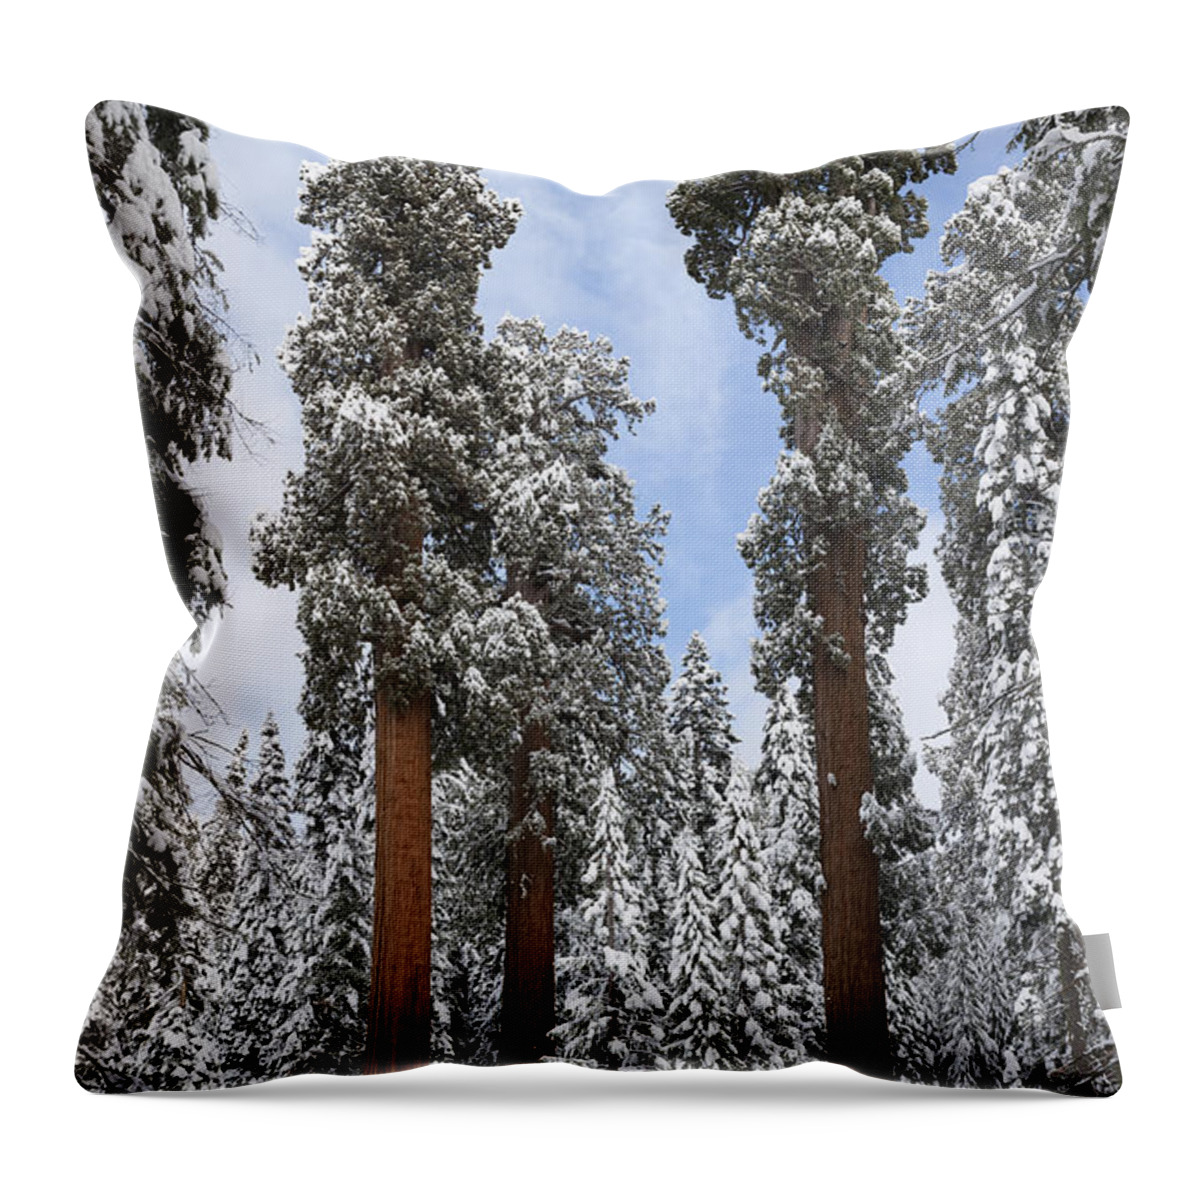 Giant Sequoia Throw Pillow featuring the photograph Giant Sequoias #1 by Gregory G. Dimijian, M.D.